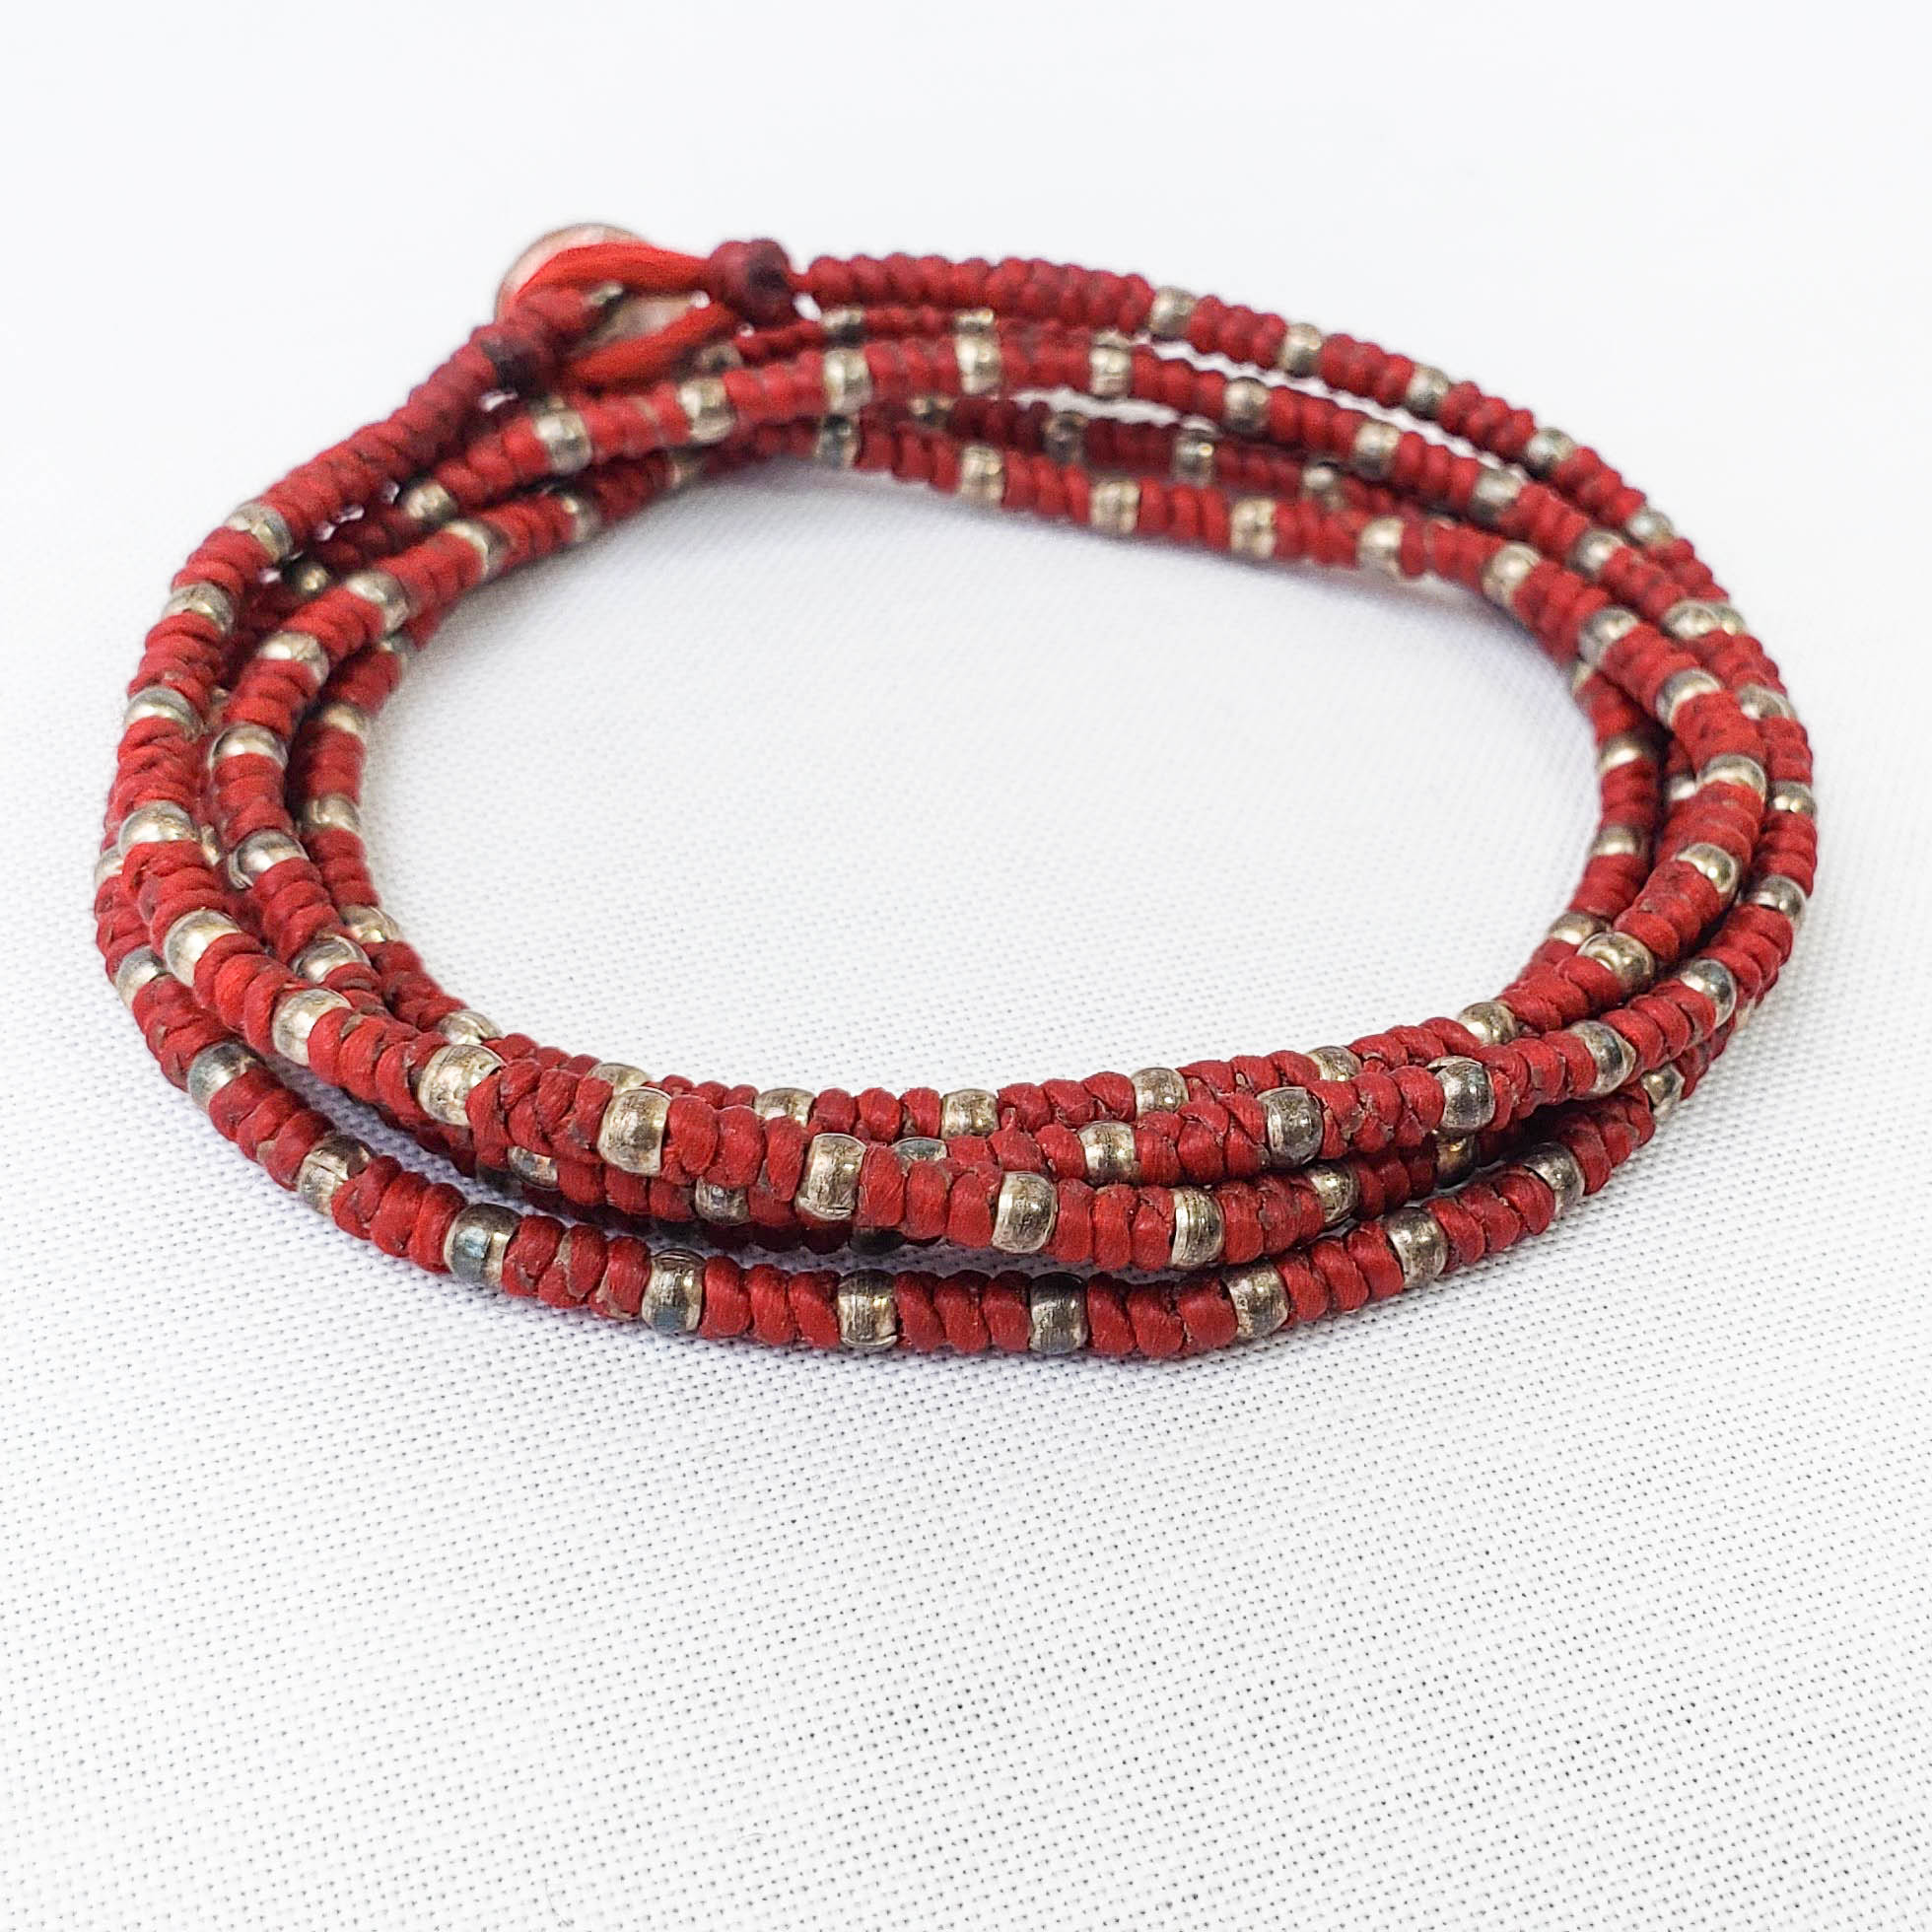 Handcrafted lava red waxed cotton bracelet with authentic fine Karen hill tribe silver